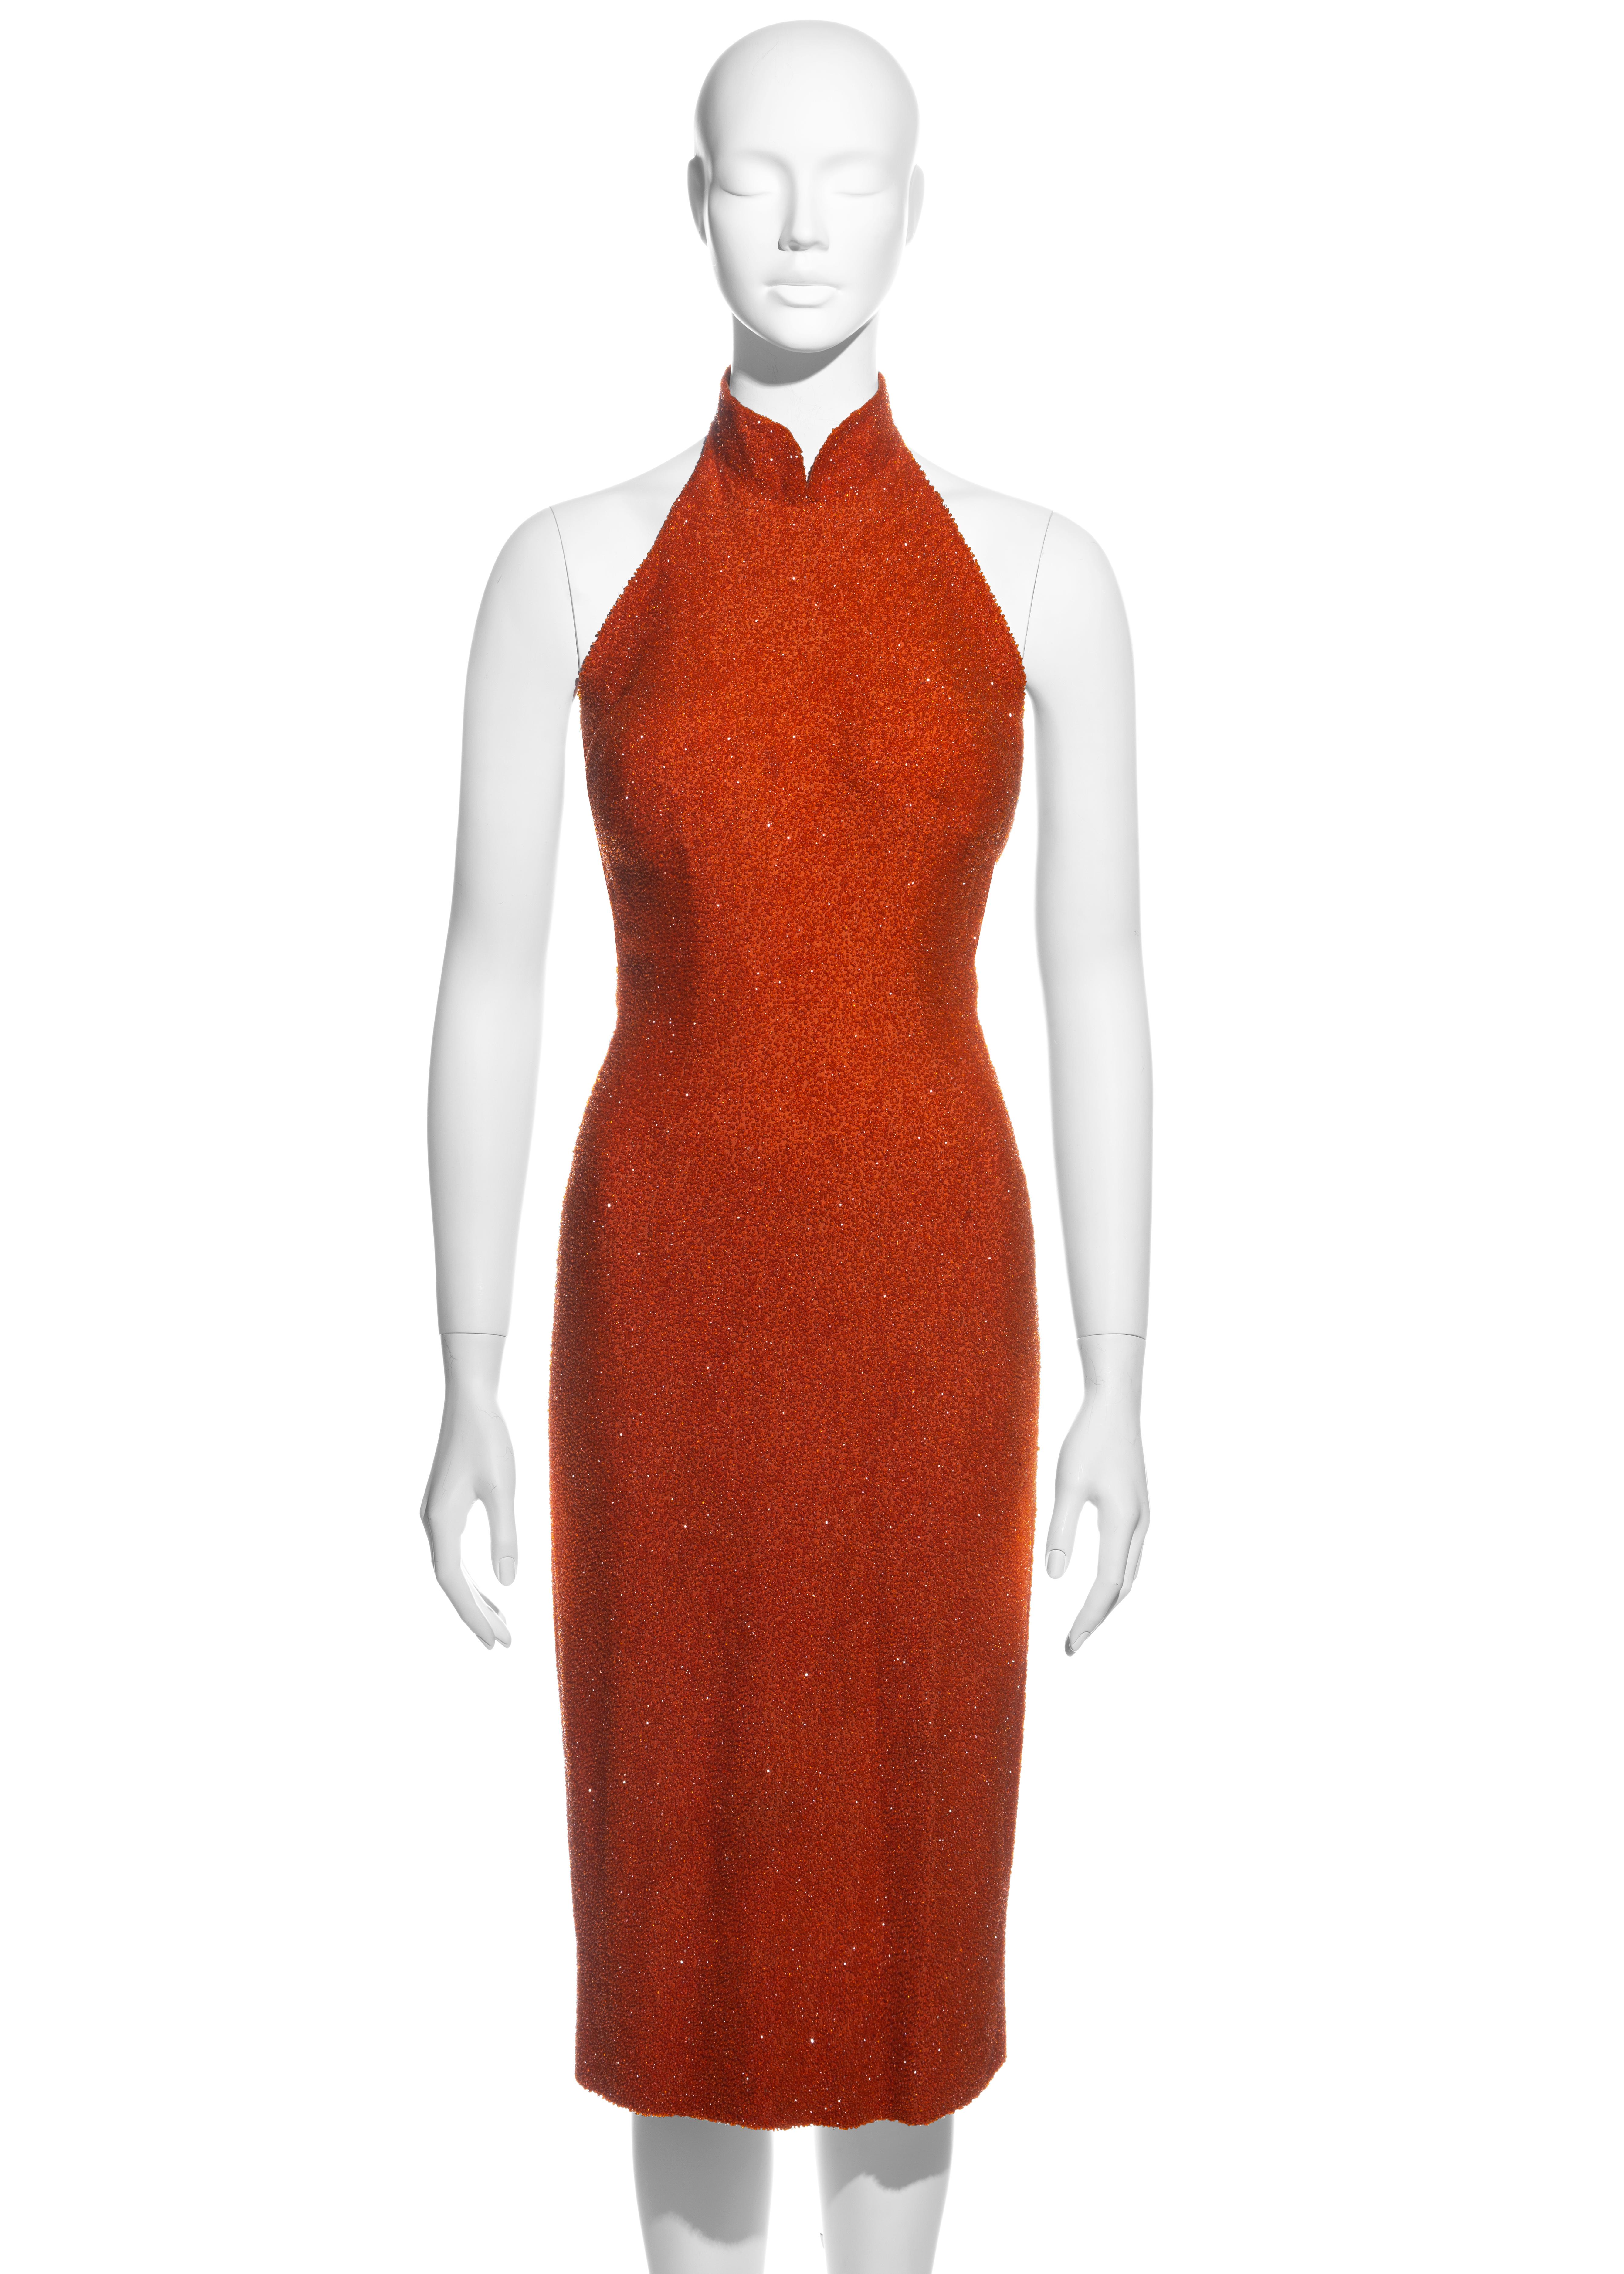 ▪ Orange silk glass beaded cocktail dress
▪ Mandarin collar 
▪ Built-in bra 
▪ Back zip fastening
▪ Fitted waist 
▪ Made to a couture standard 
▪ Unknown designer
▪ c. 1960s  